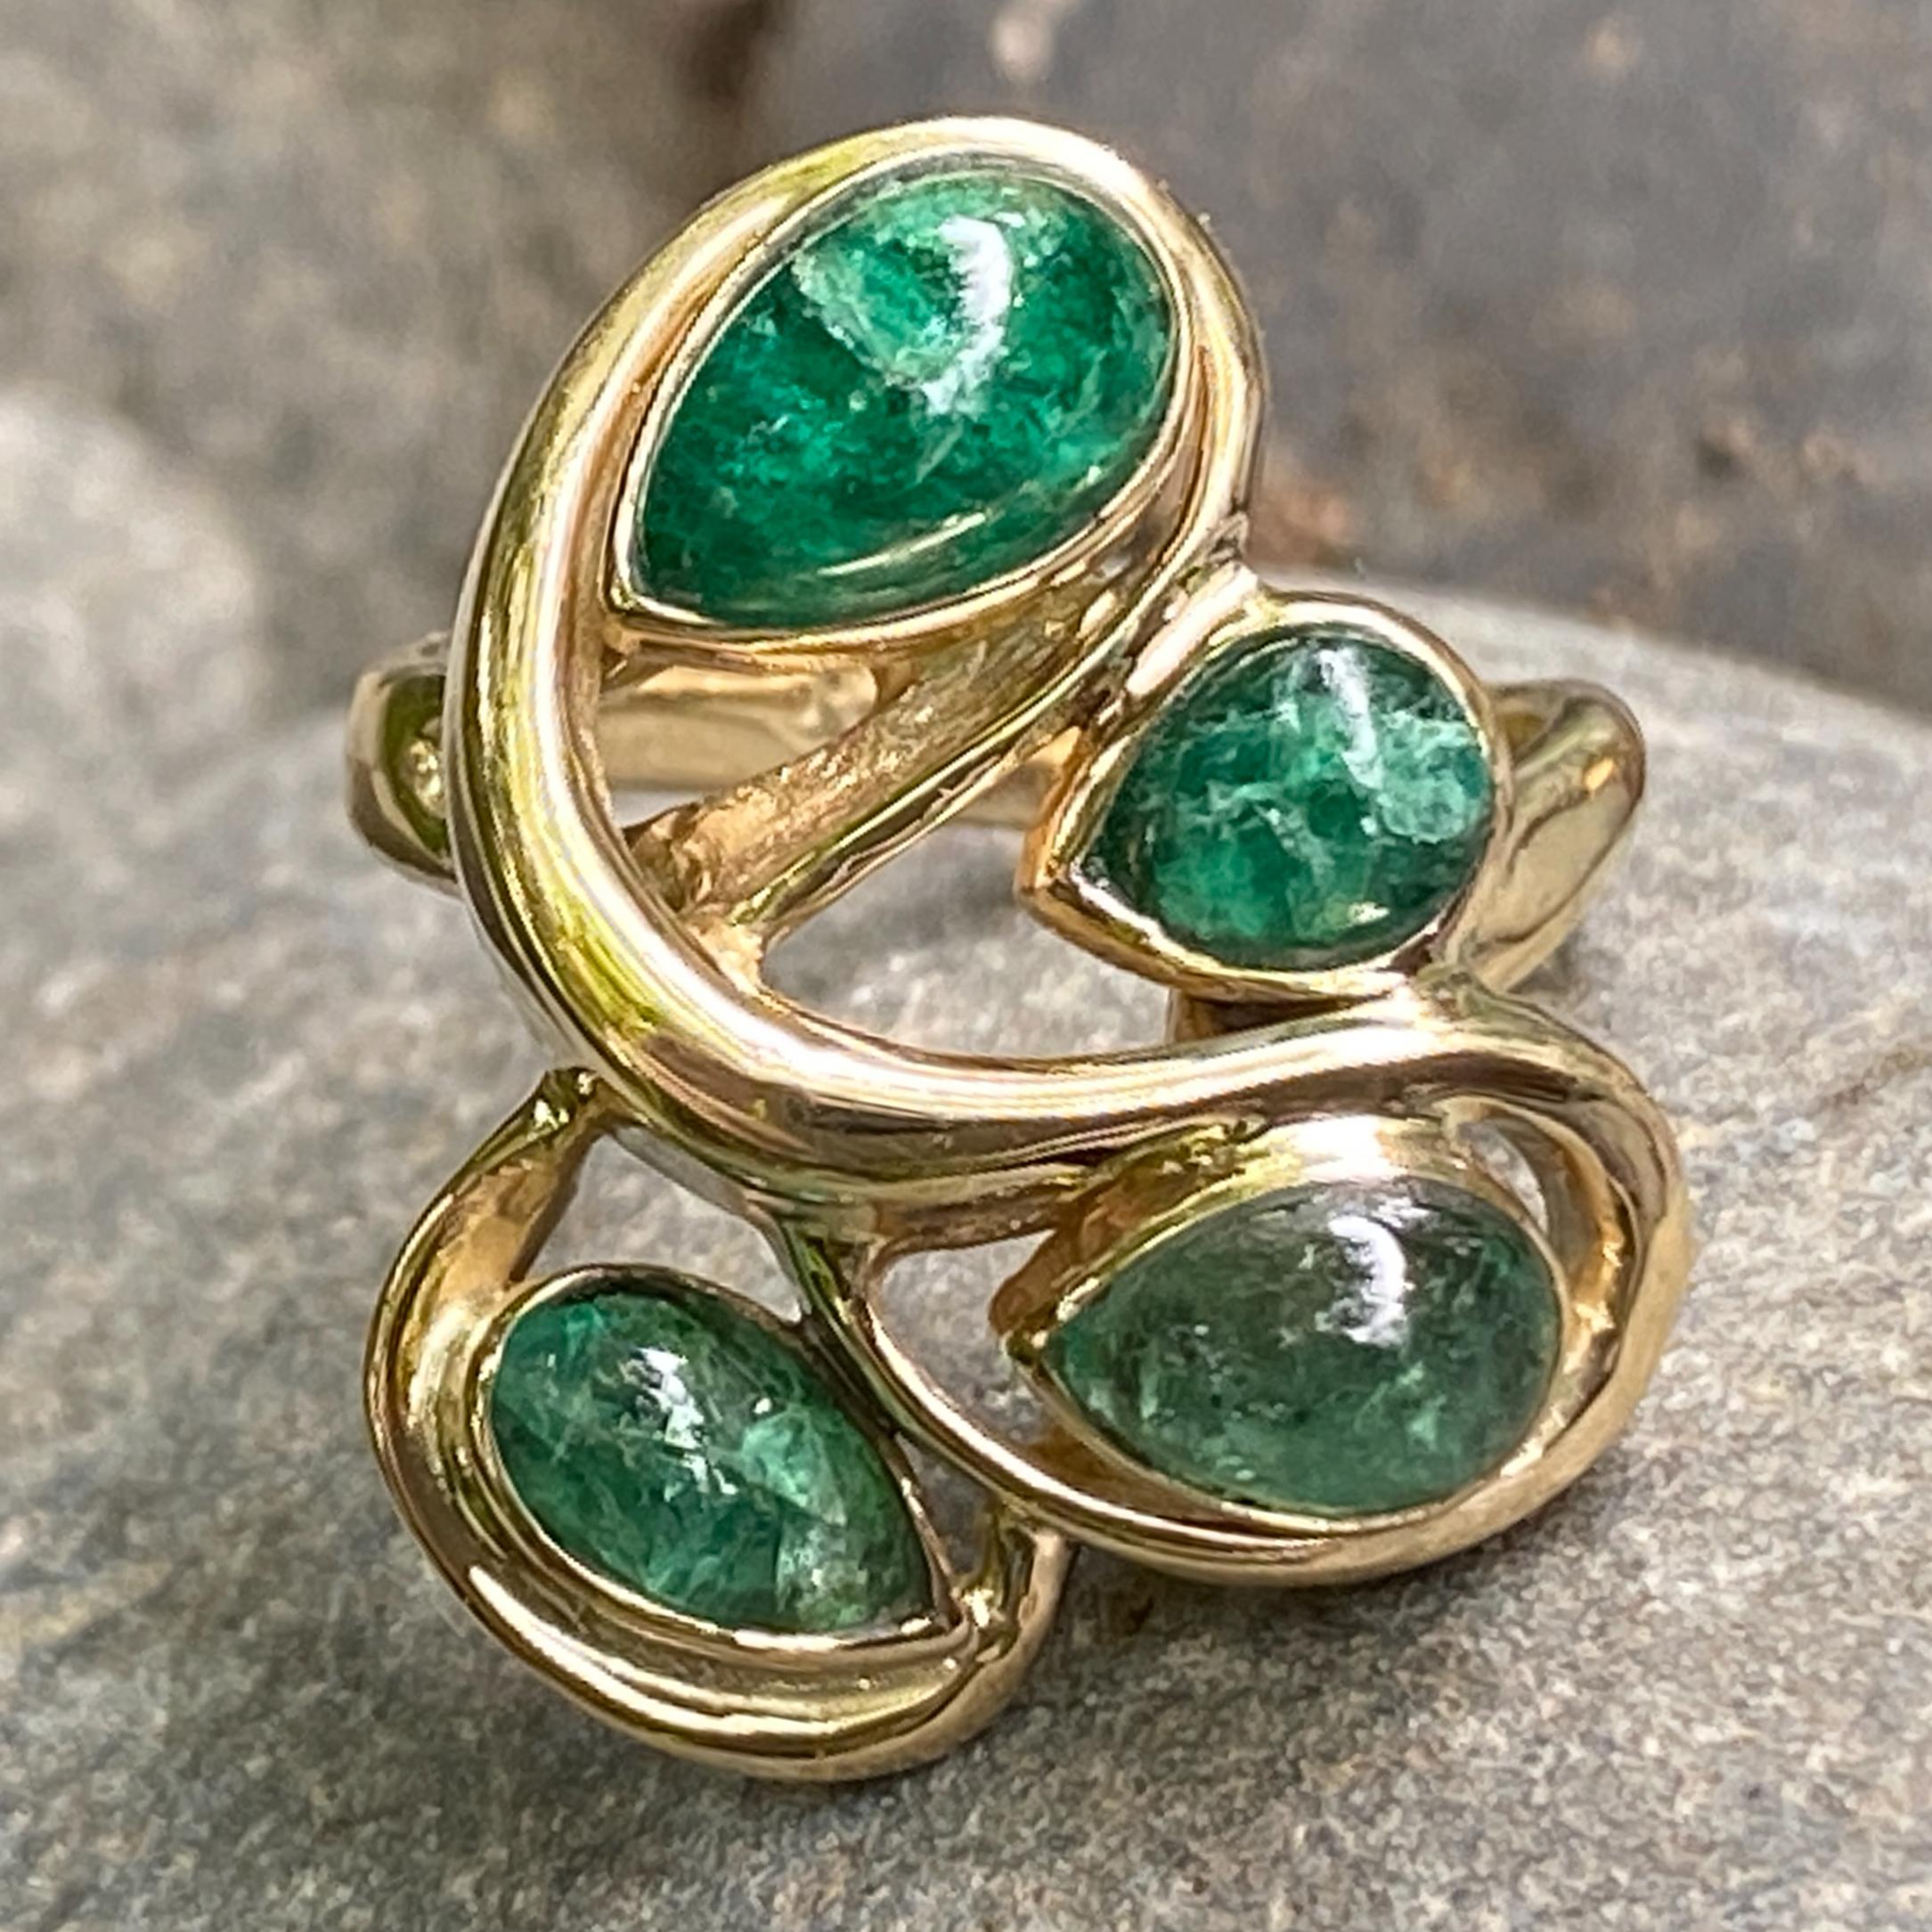 This ring was born in the 1970s and was a popular, ubiquitous style at the time.  Ours was originally set with some very sad and uninspired white (aka precious) opals.  When we gazed upon this ring, we felt as sad and uninspired as those boring